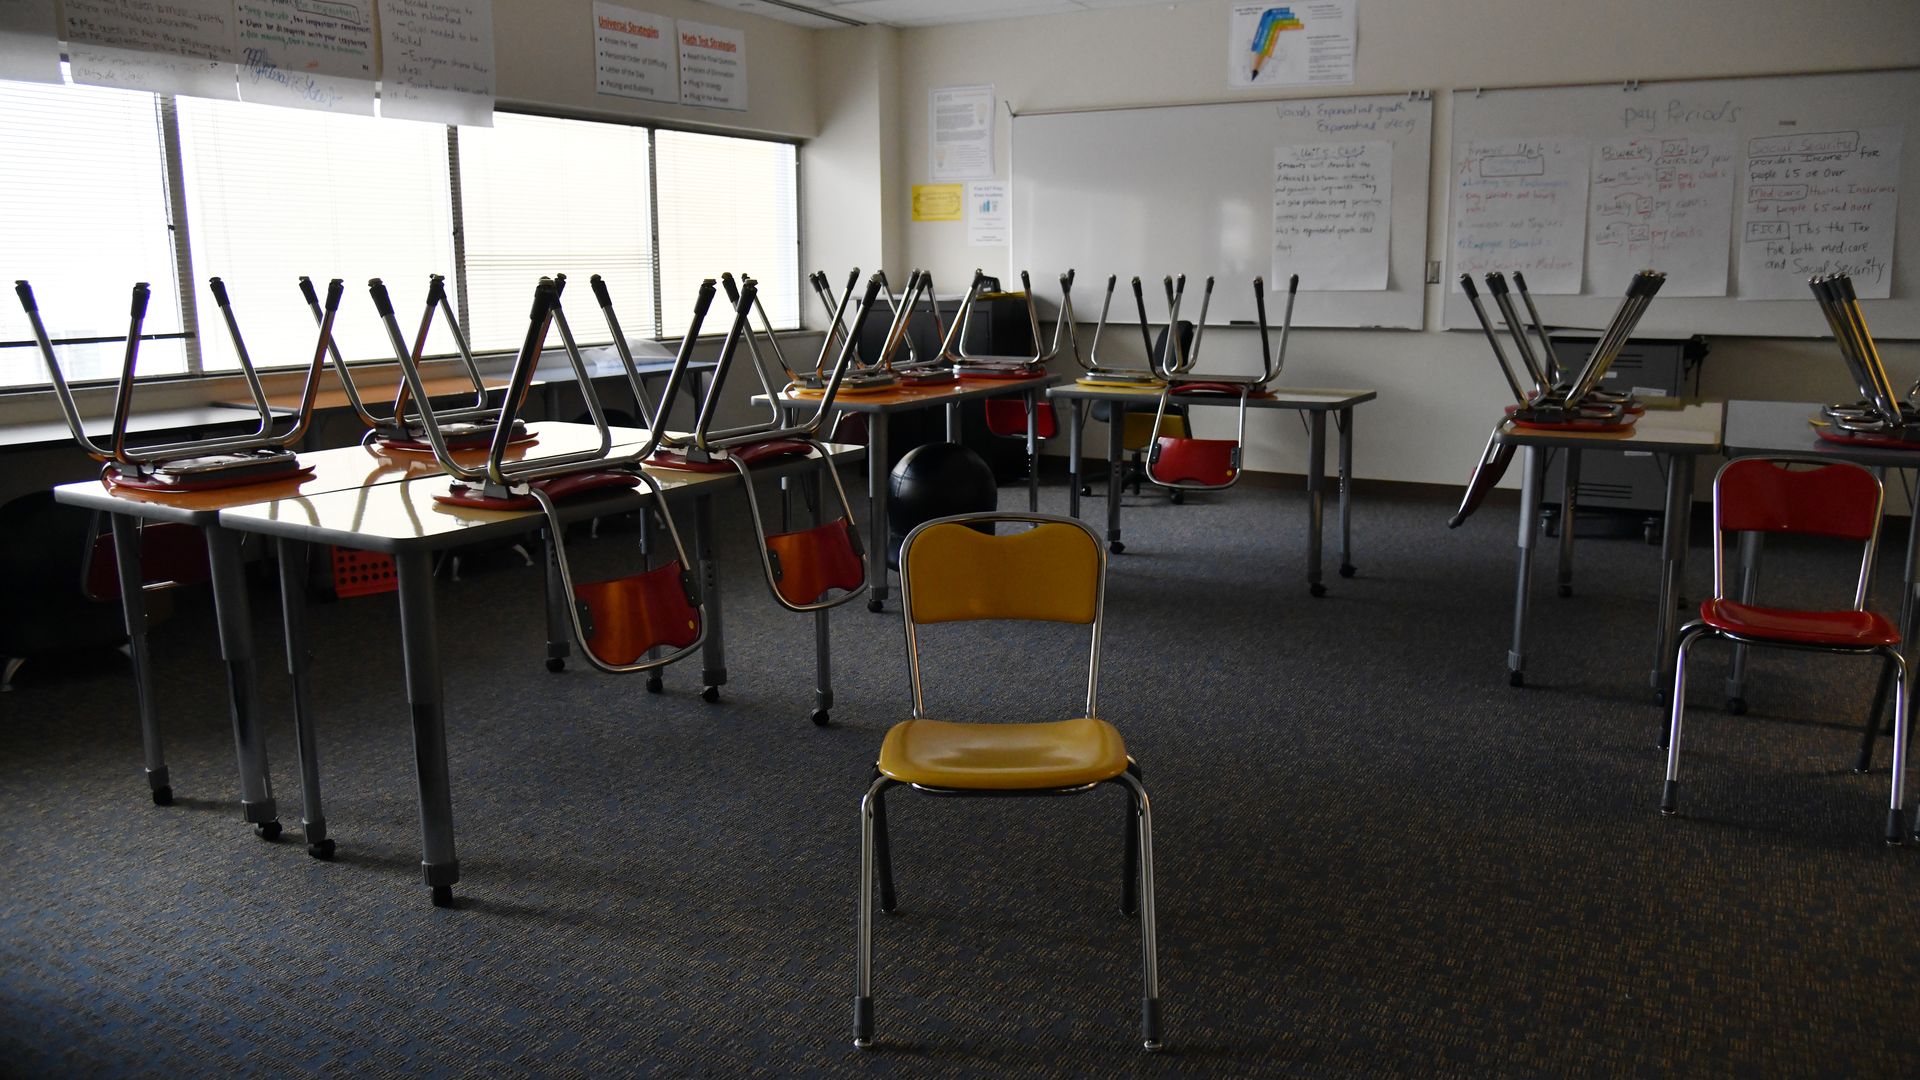  An empty classroom in Denver. Photo: Hyoung Chang/Denver Post via Getty Images